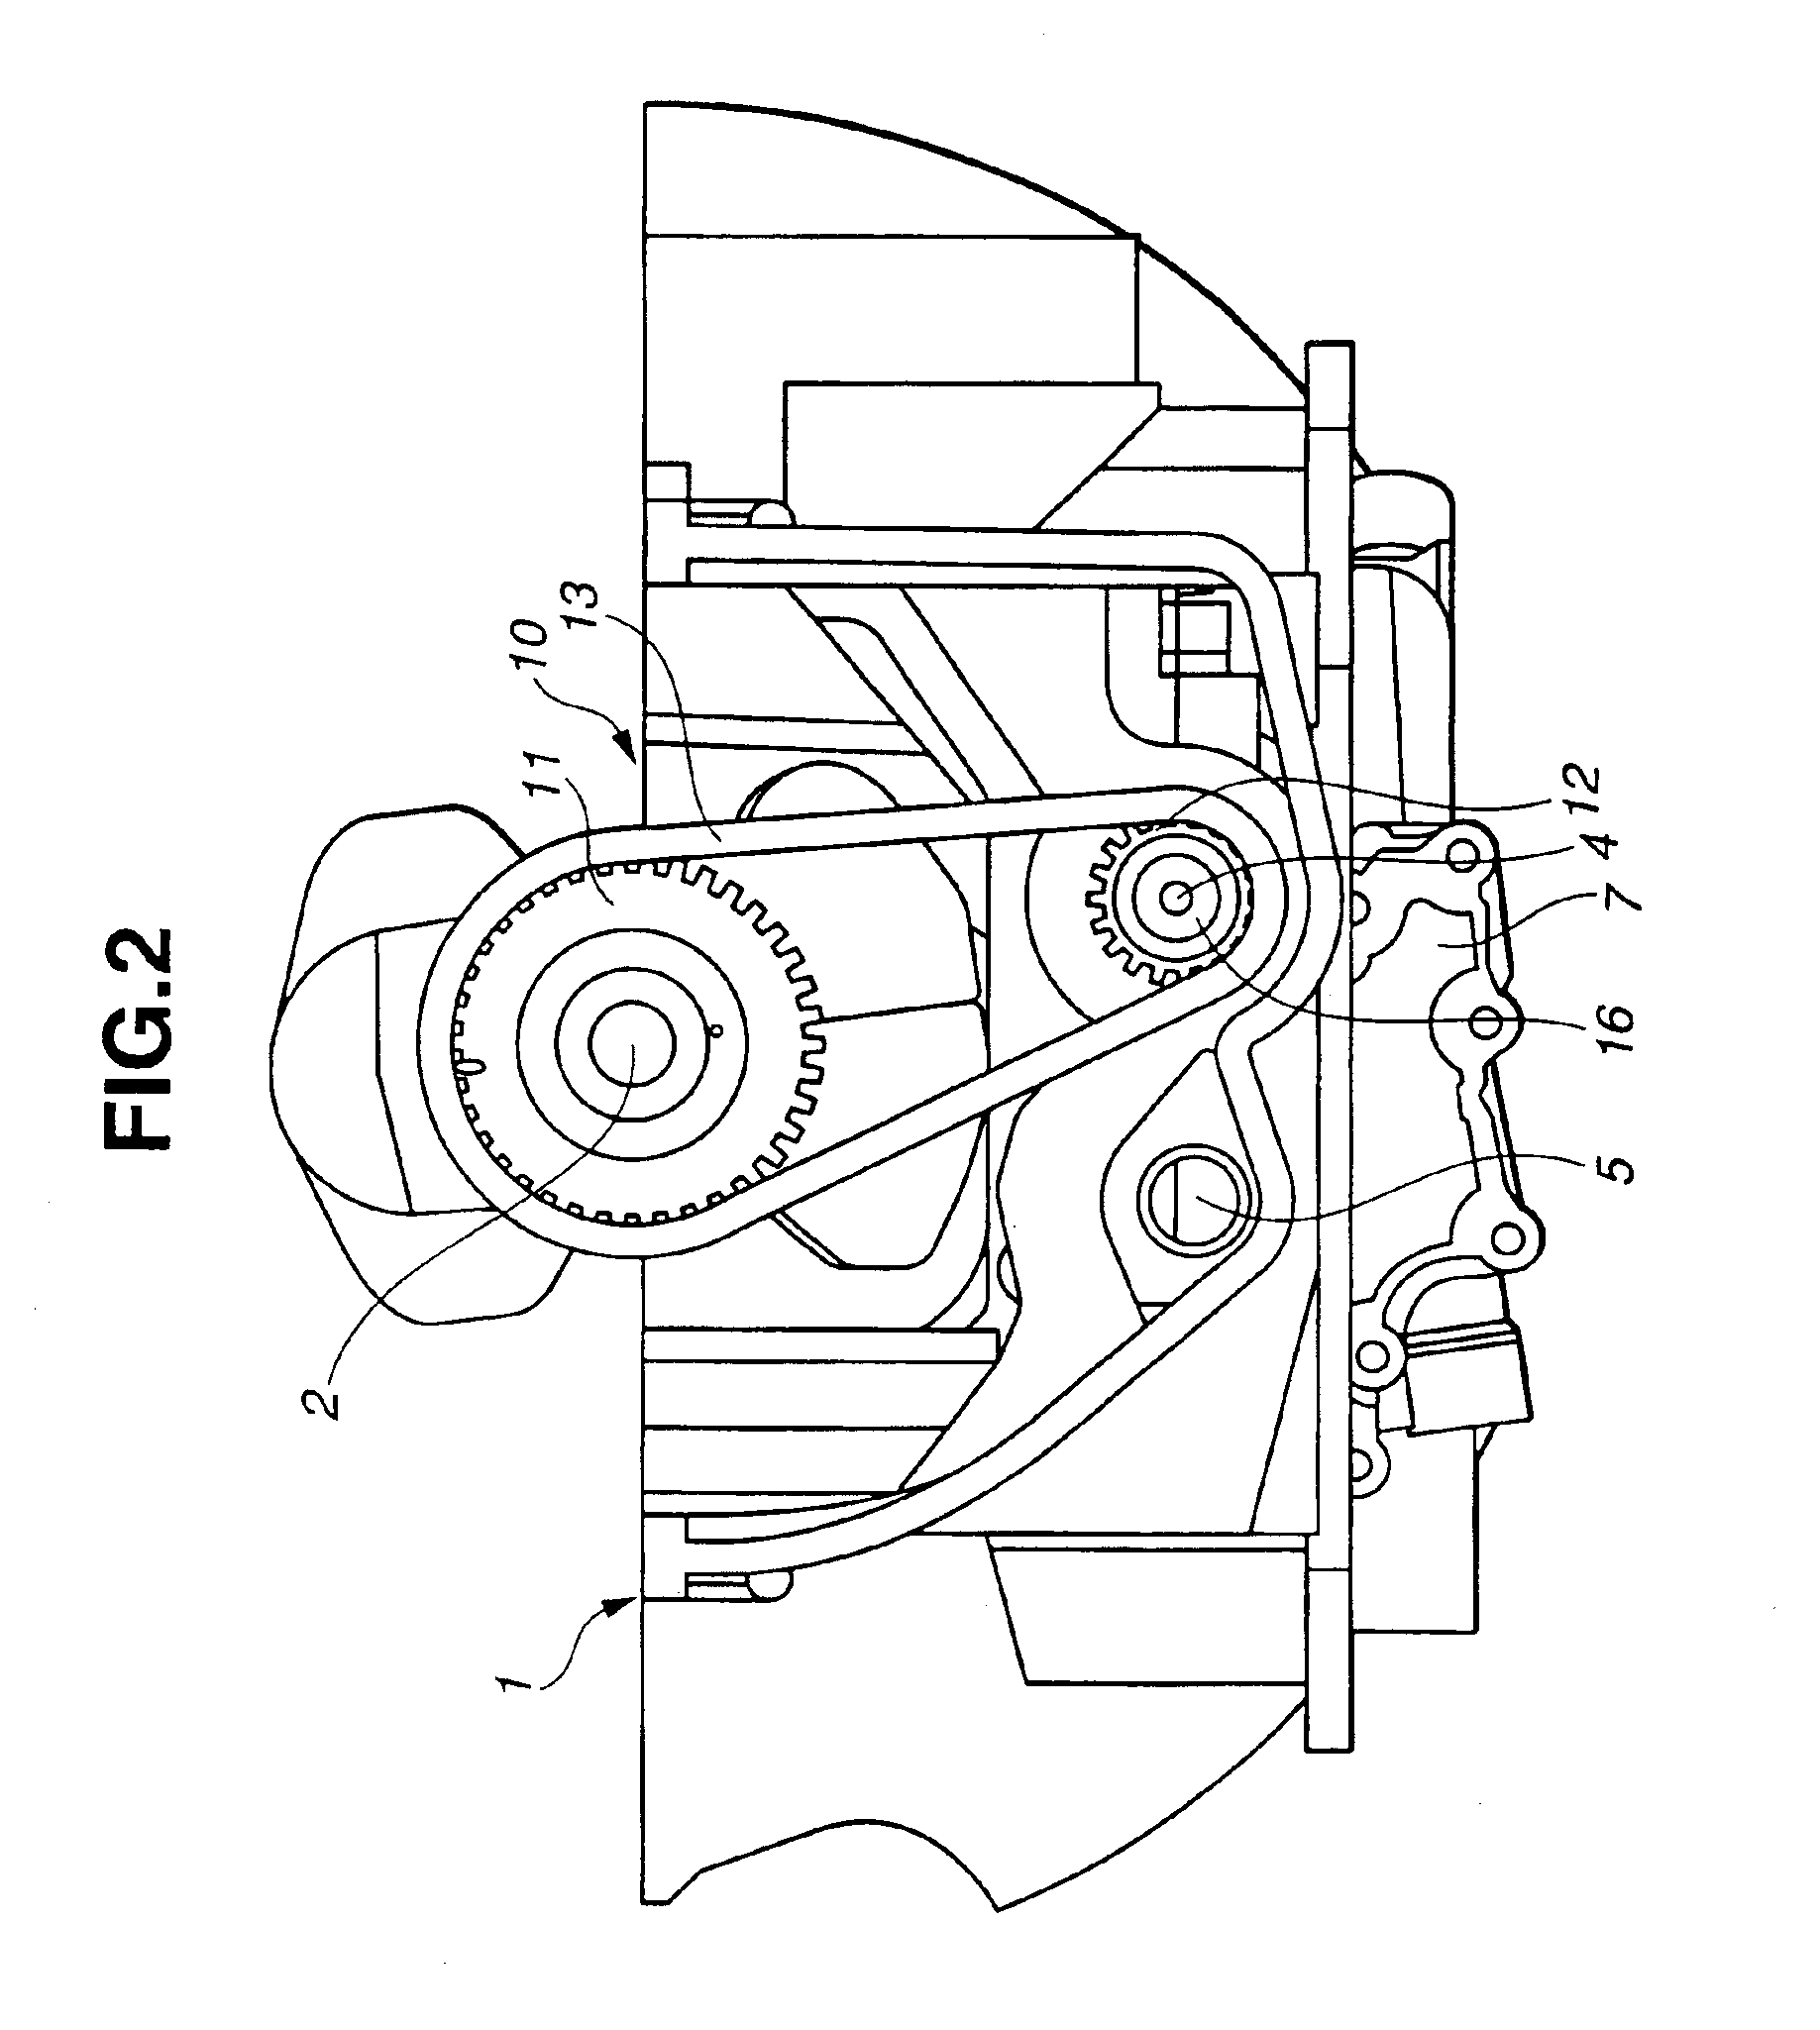 Internal combustion engine with balancer shaft and method of assembling the same